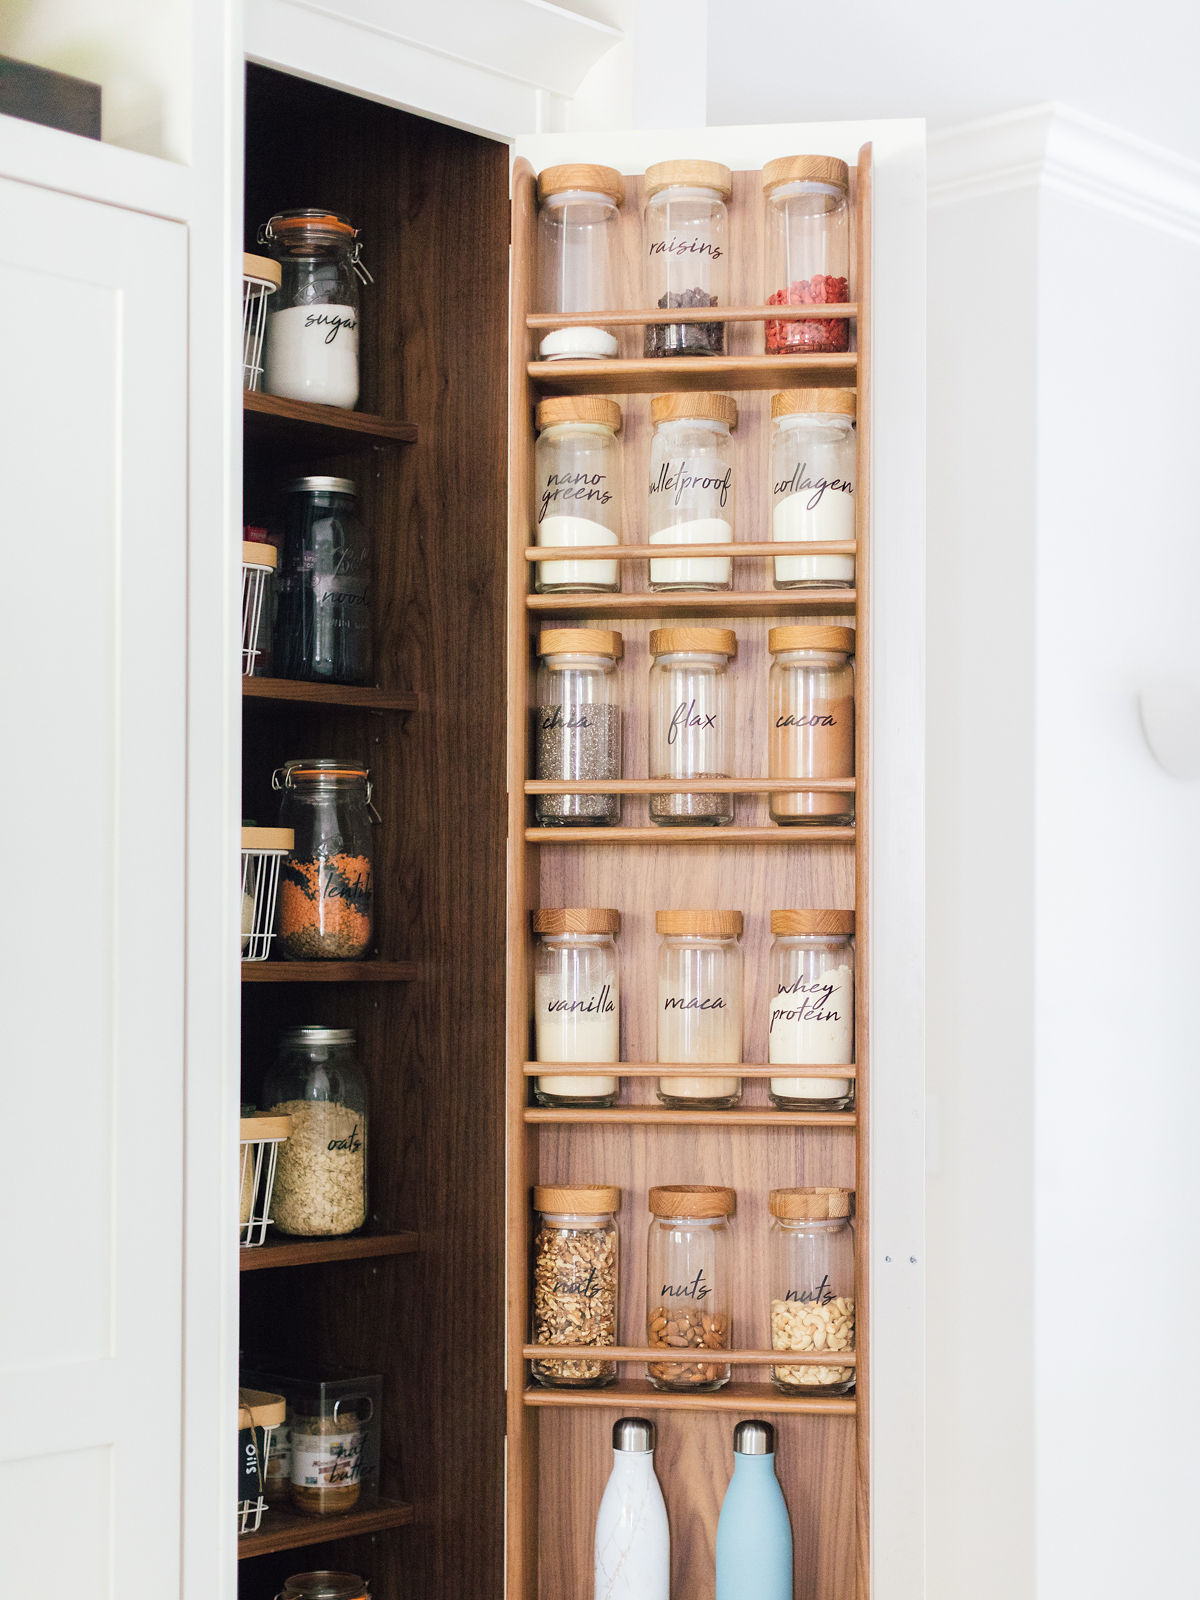 mounted door rack with pantry items